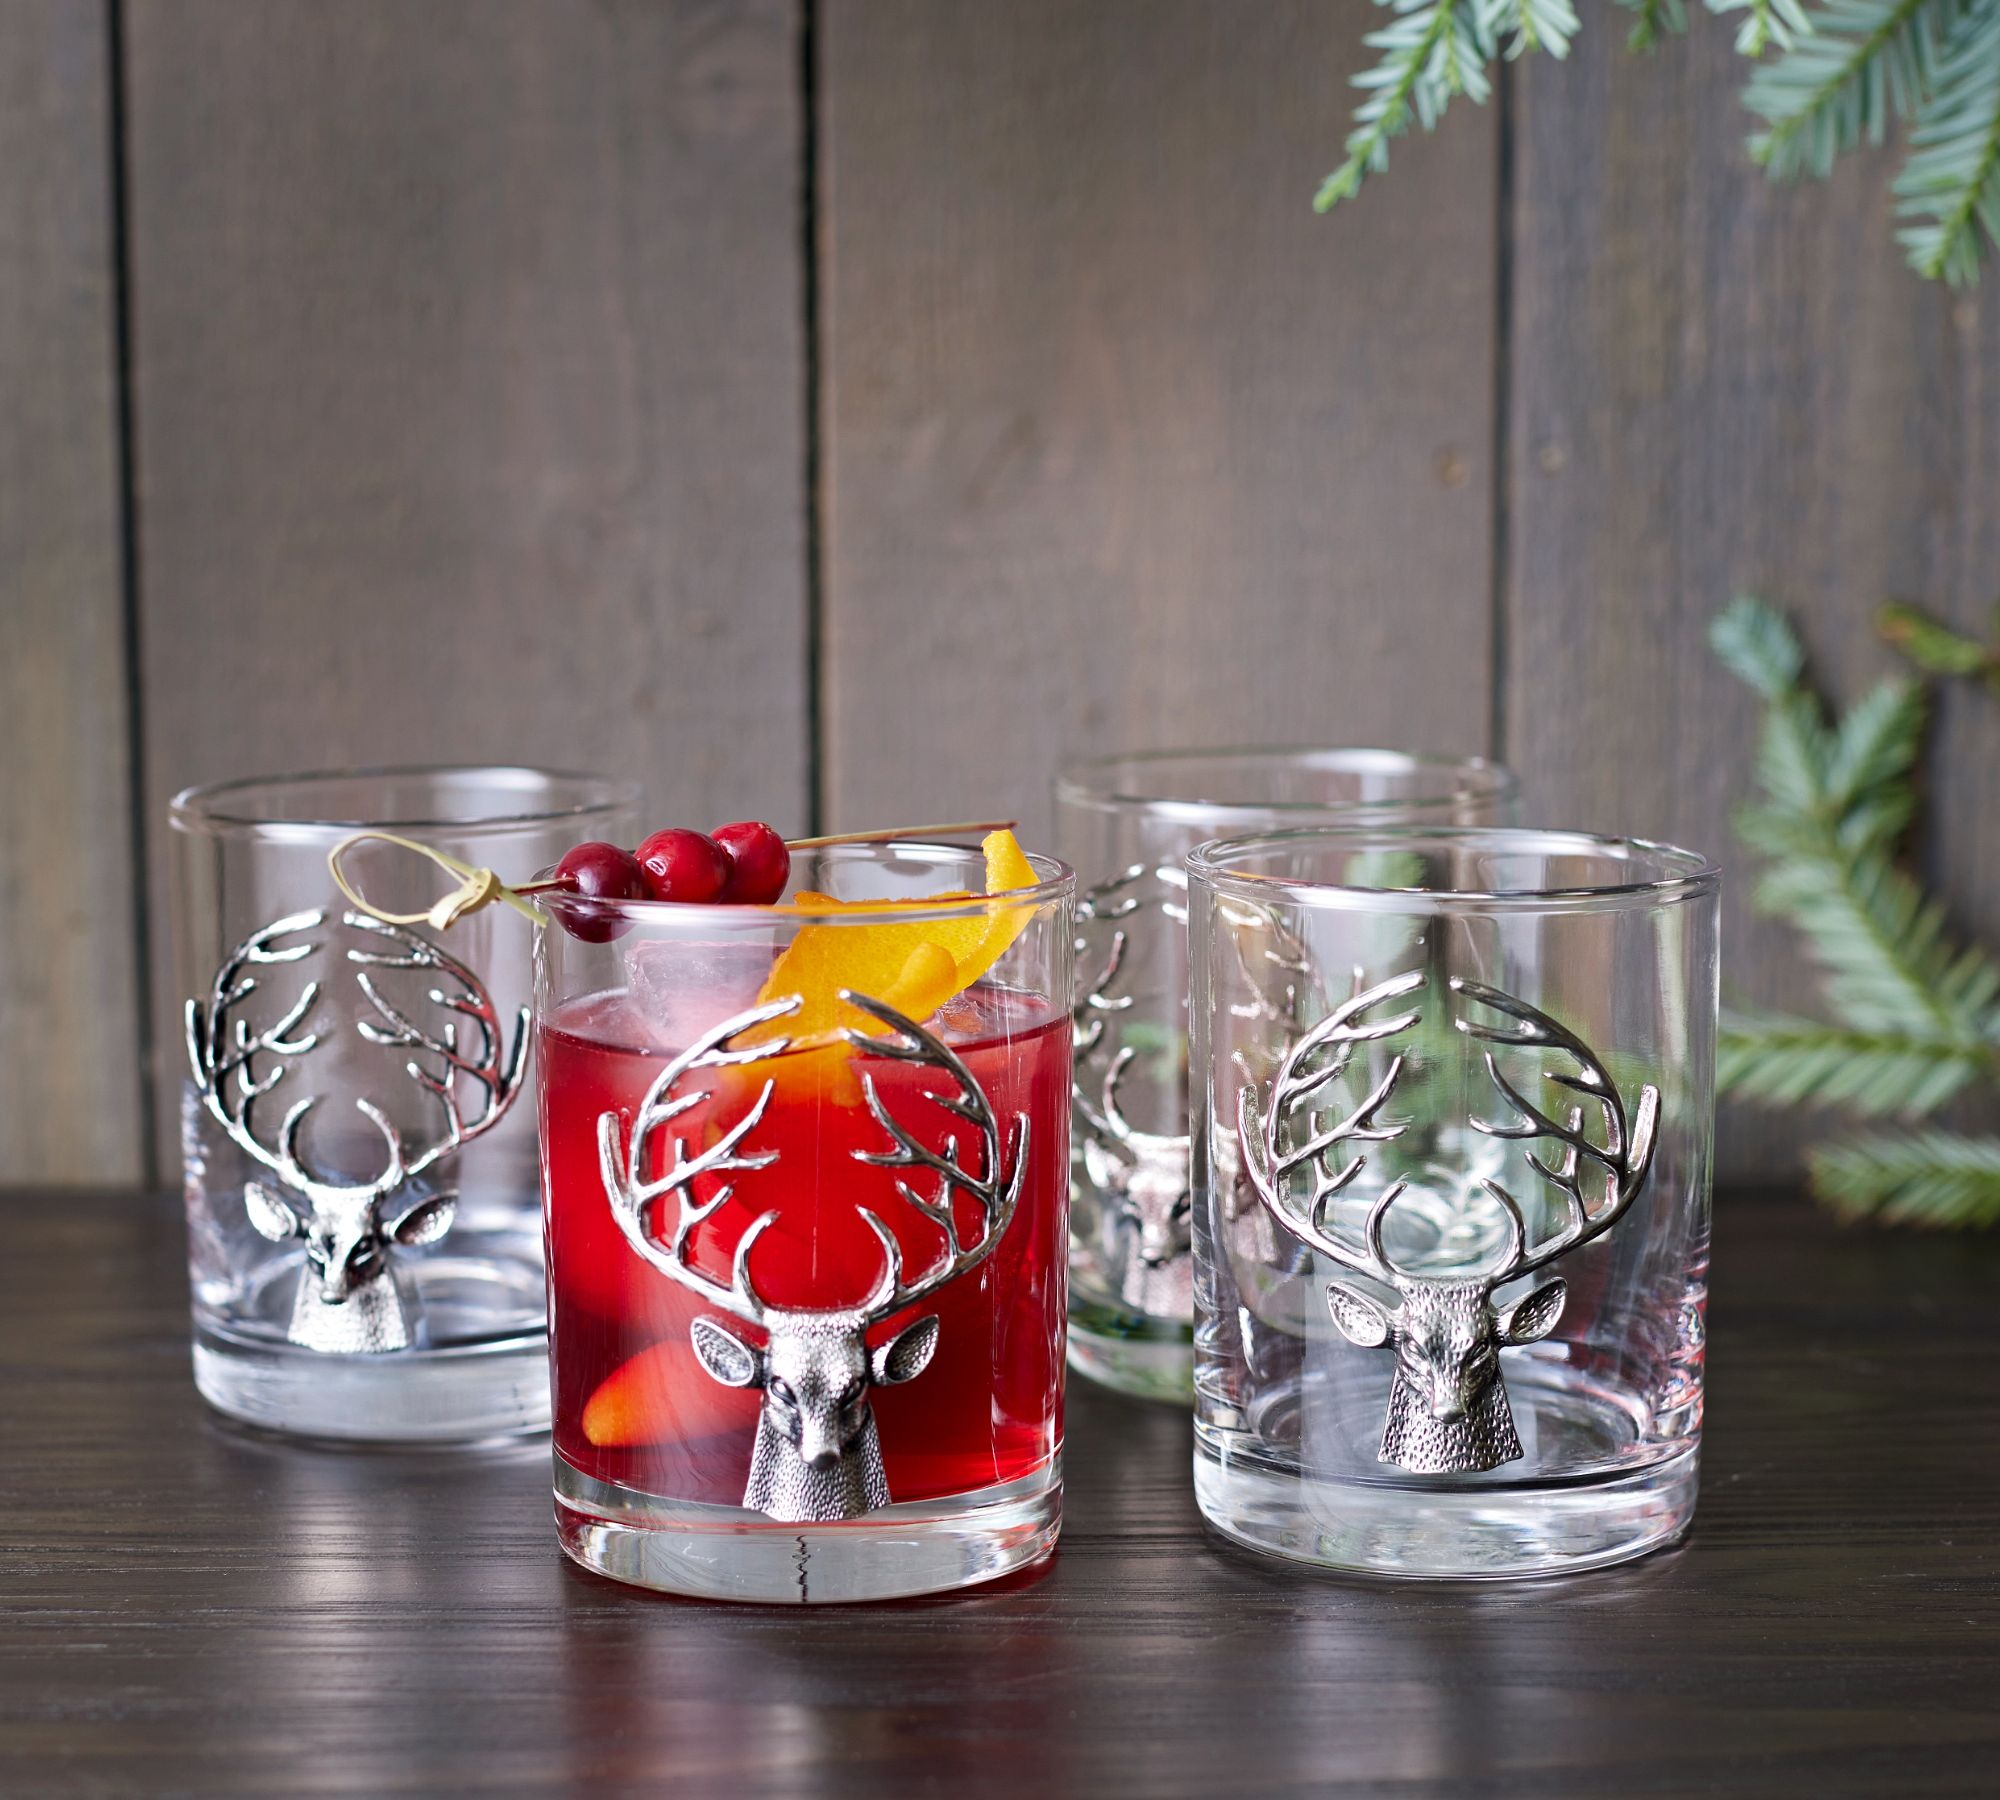 Figural Stag Double Old Fashioned Glasses - Set of 2